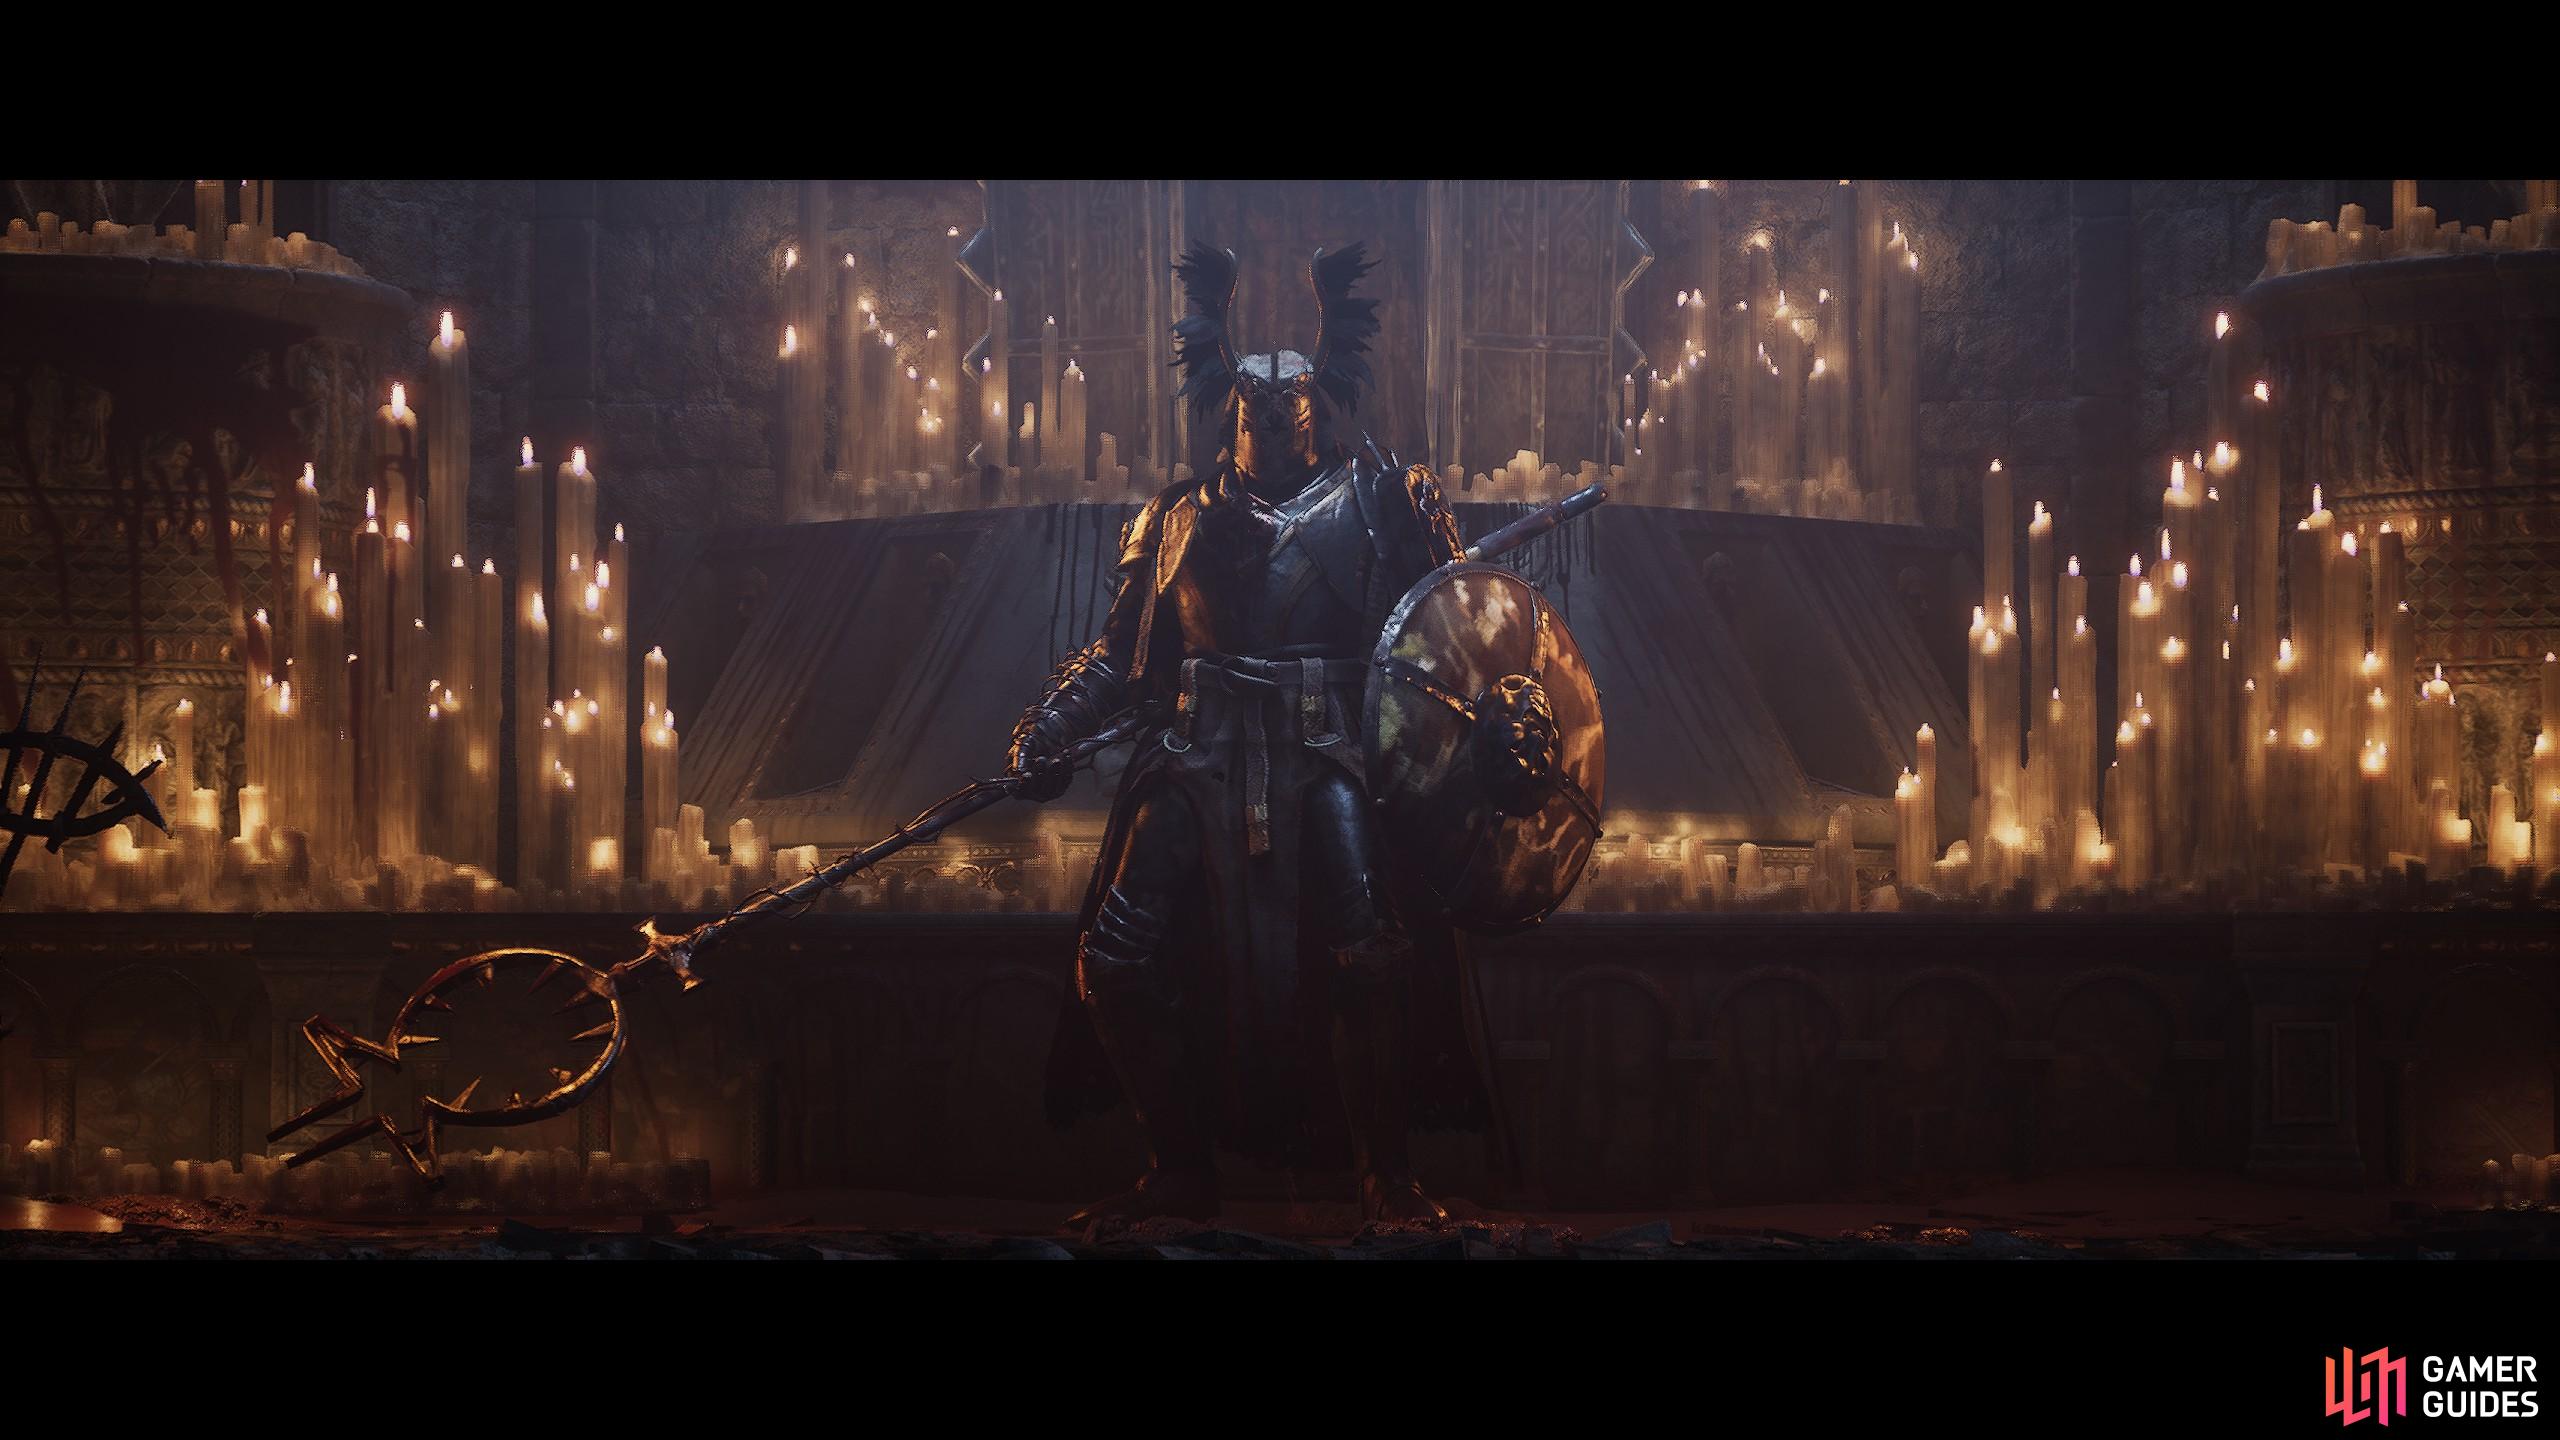 Tancred is the final bulwark between you and completing the Tower of Penance Walkthrough in Lords of the Fallen.